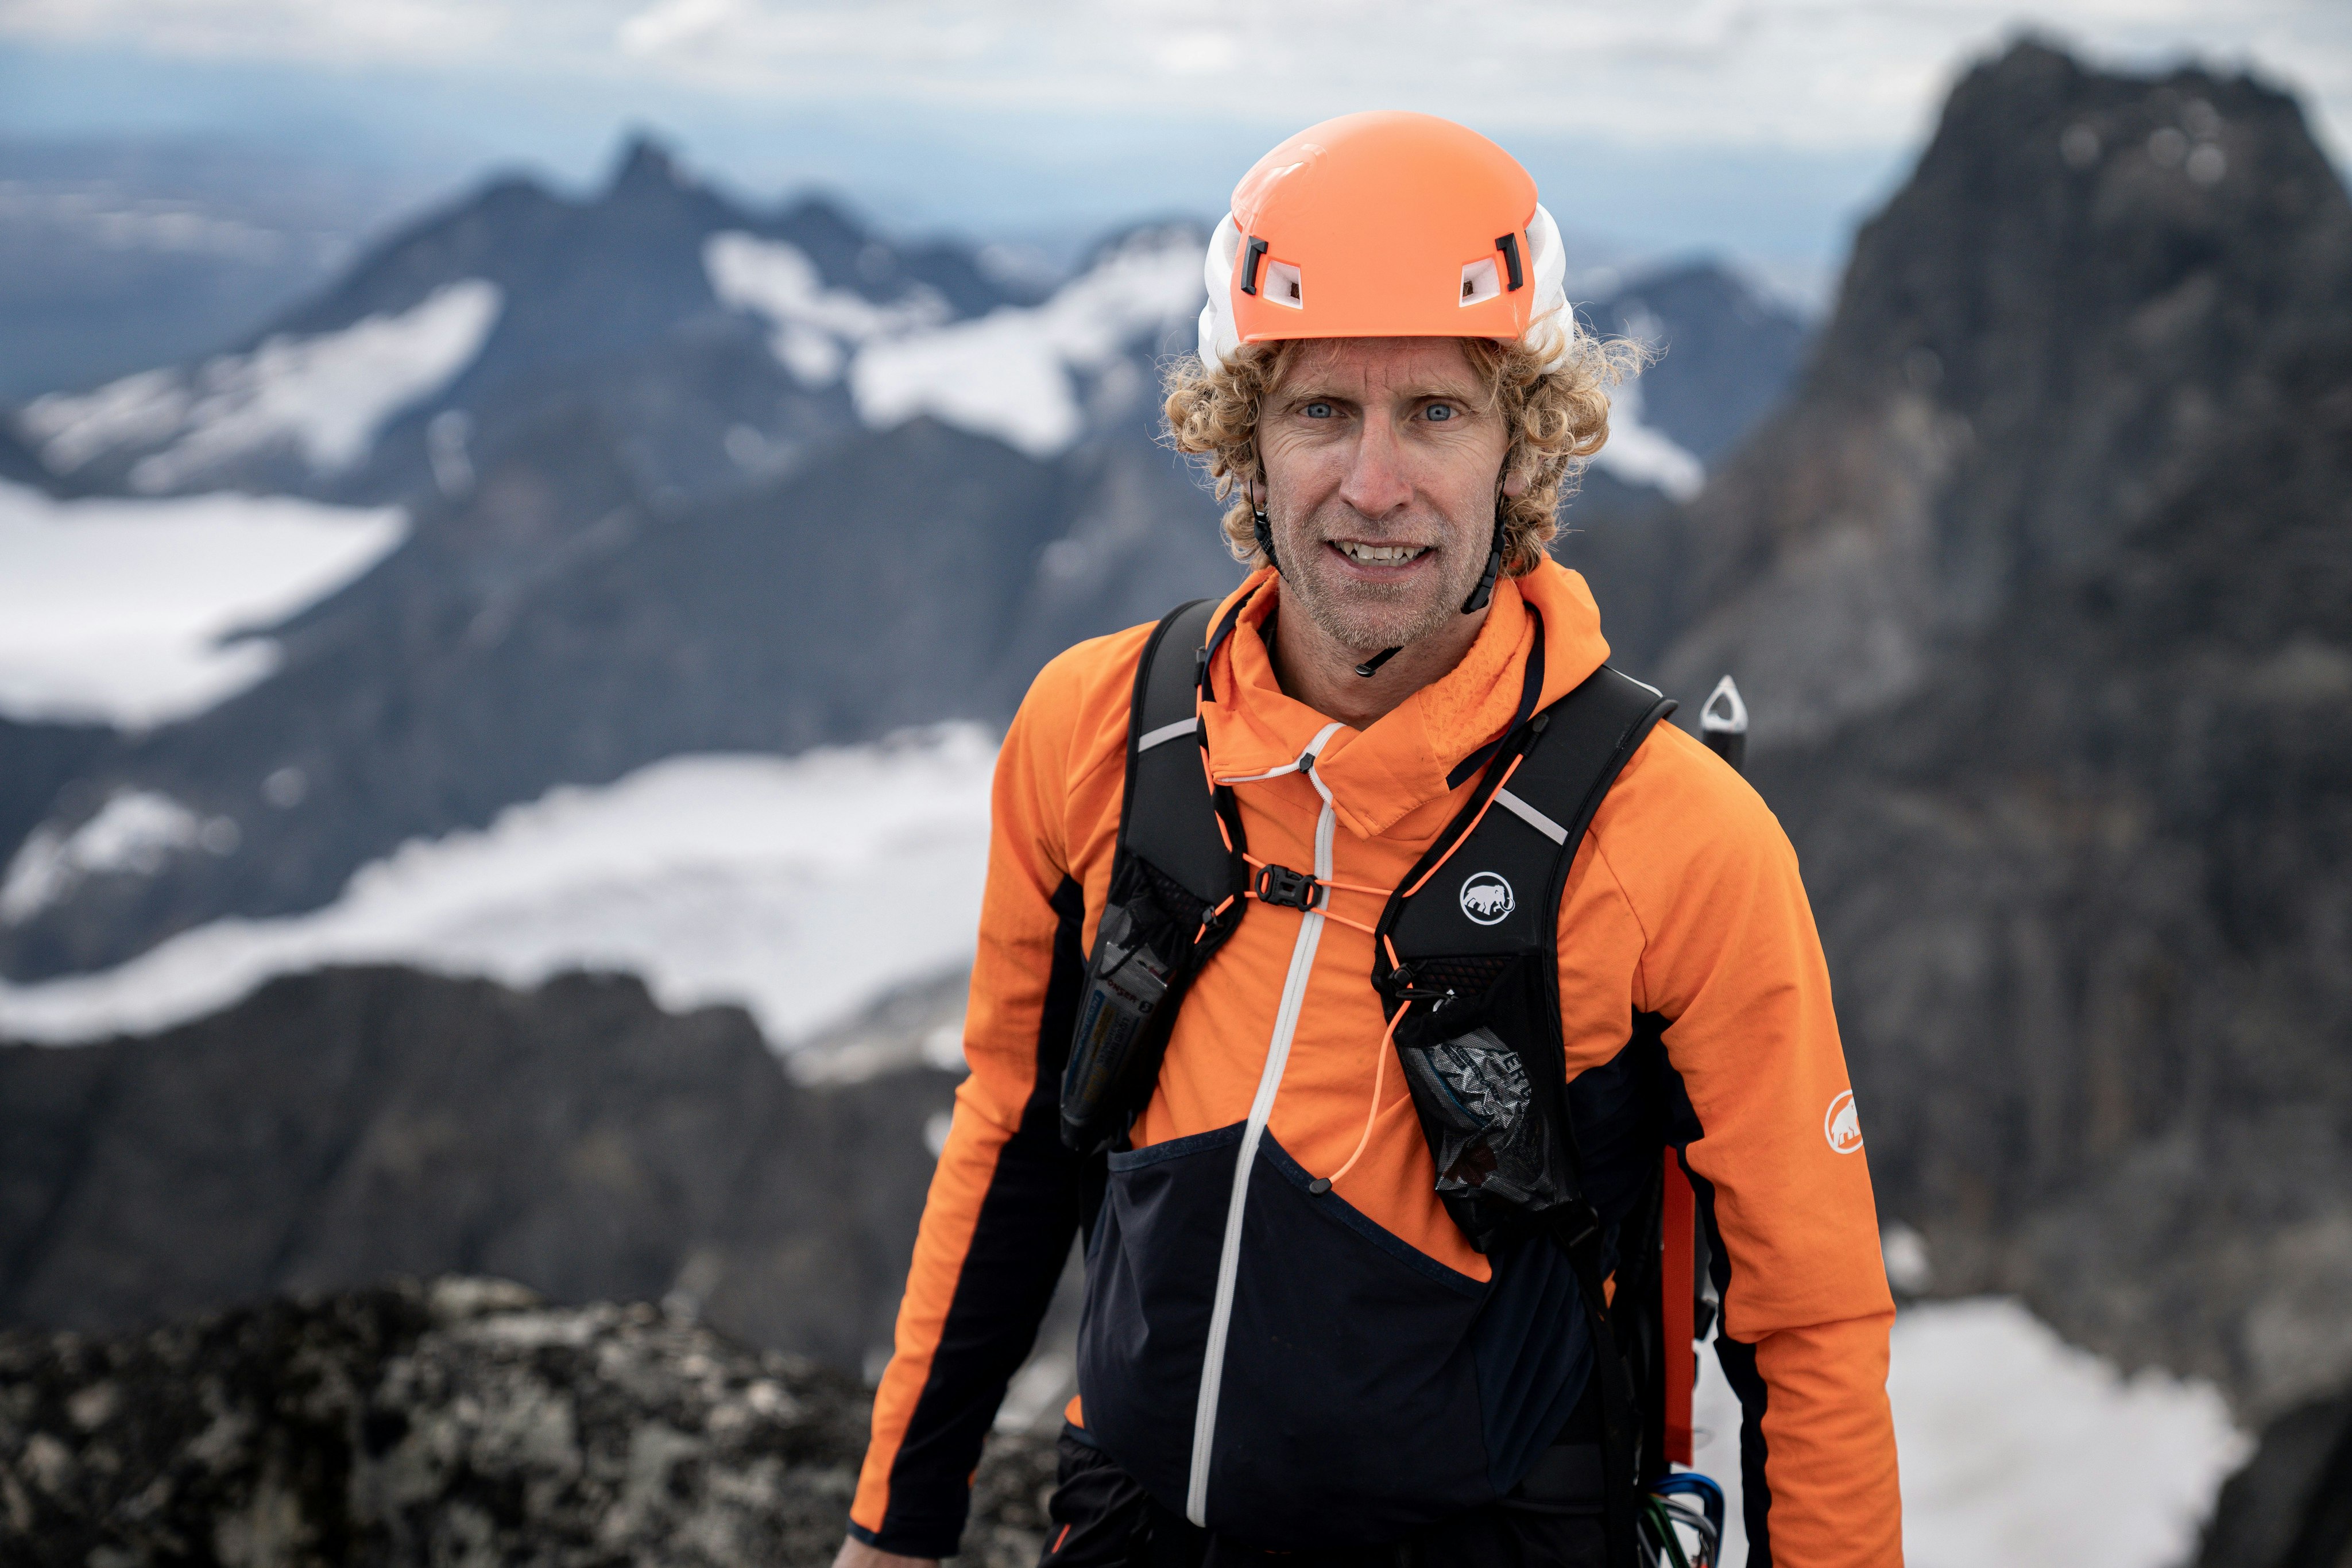 A climber in a Mammut orange helmet and jacket stands on a mountain surrounded by snowy peaks.